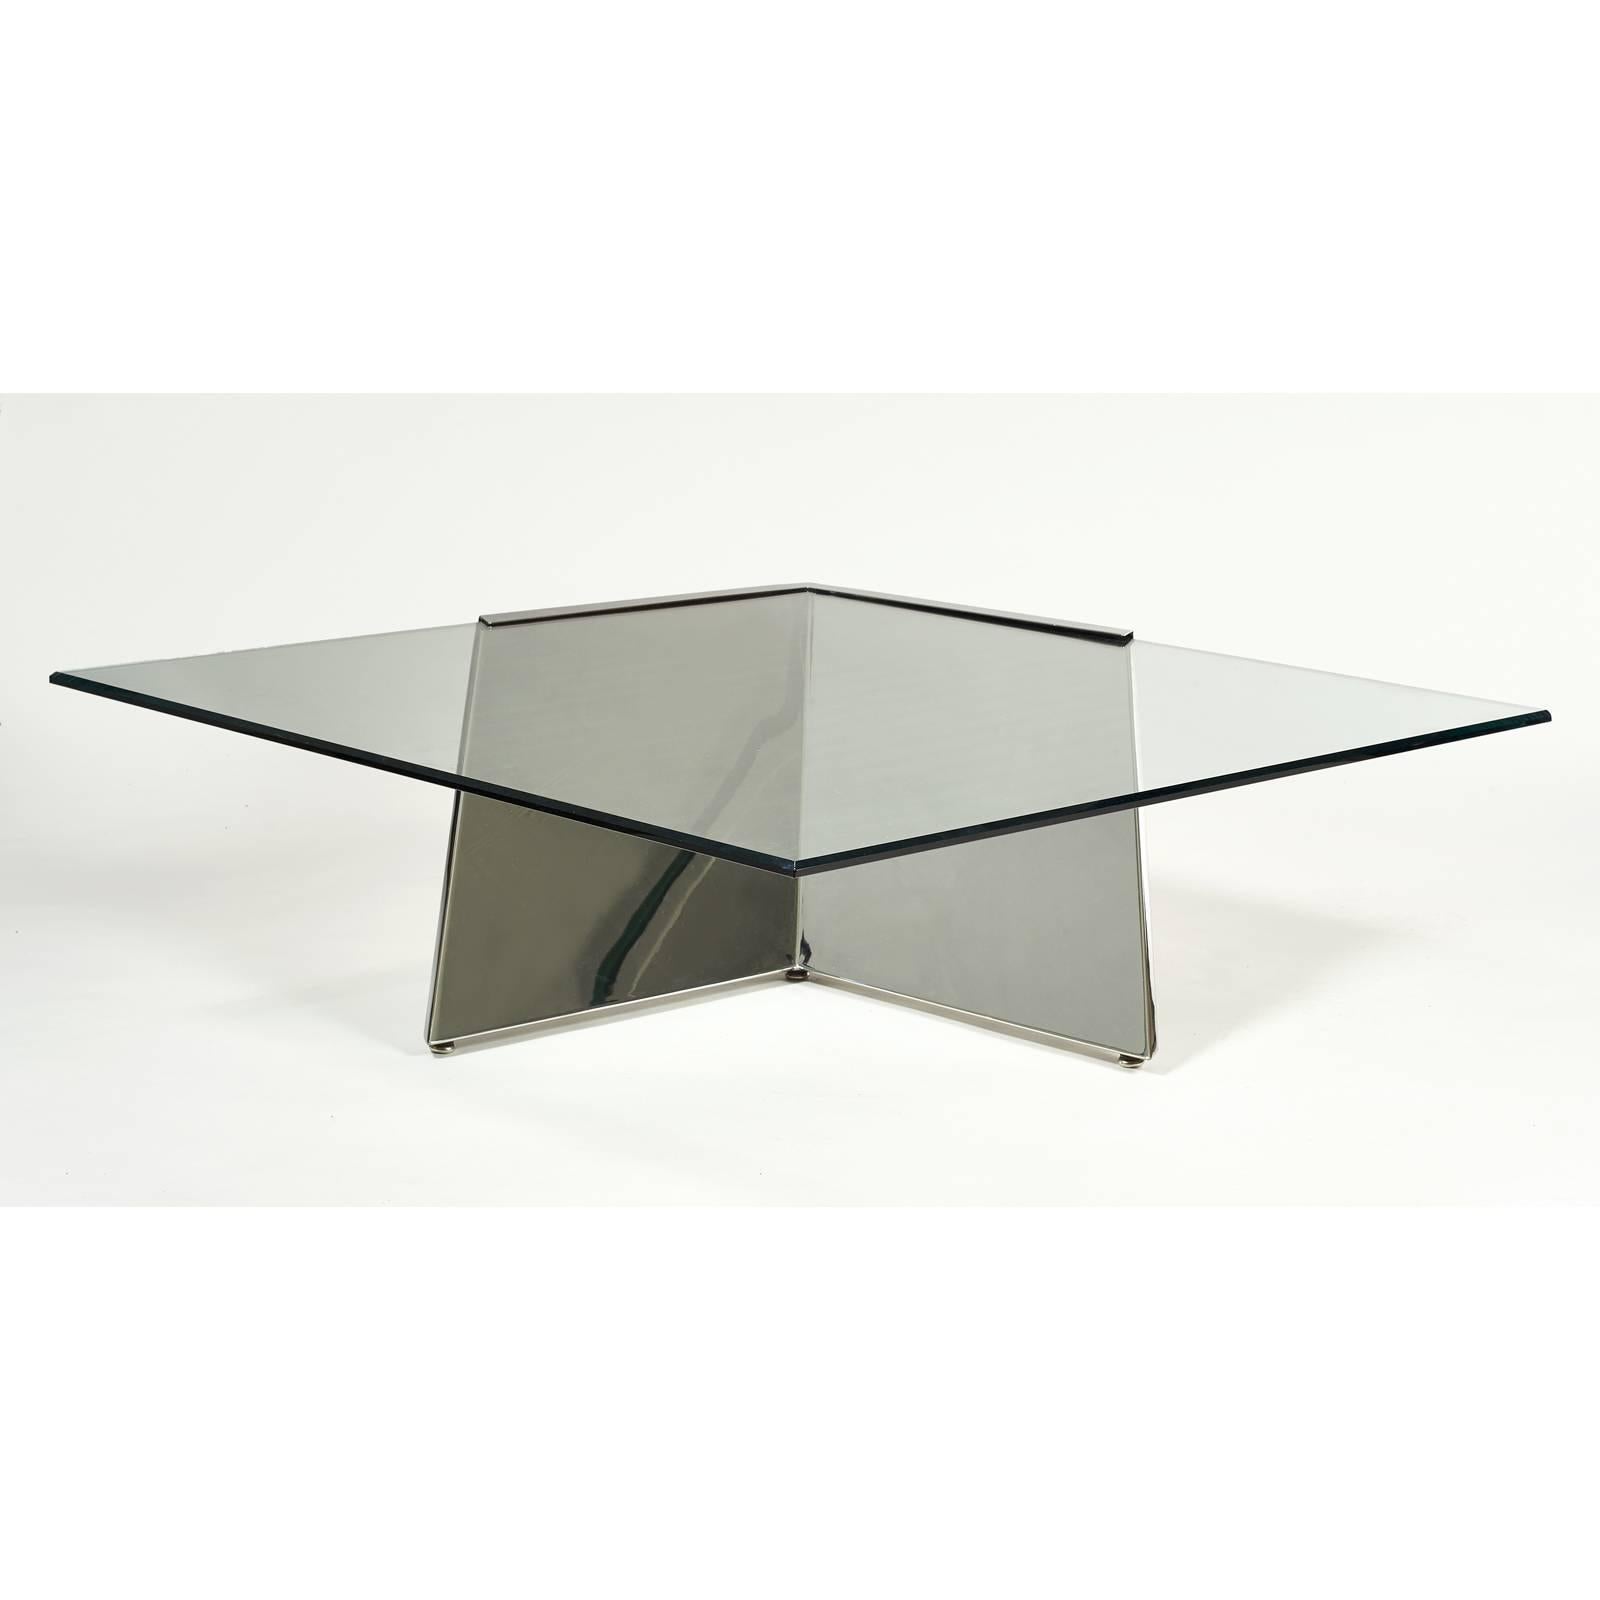 You are viewing a very unique cantilever coffee table. (We have one more in another listing). First of all, its a real eyecatcher when someone walks into a living room. It seems to defy gravity. The piece is very heavy and substantial. The glass